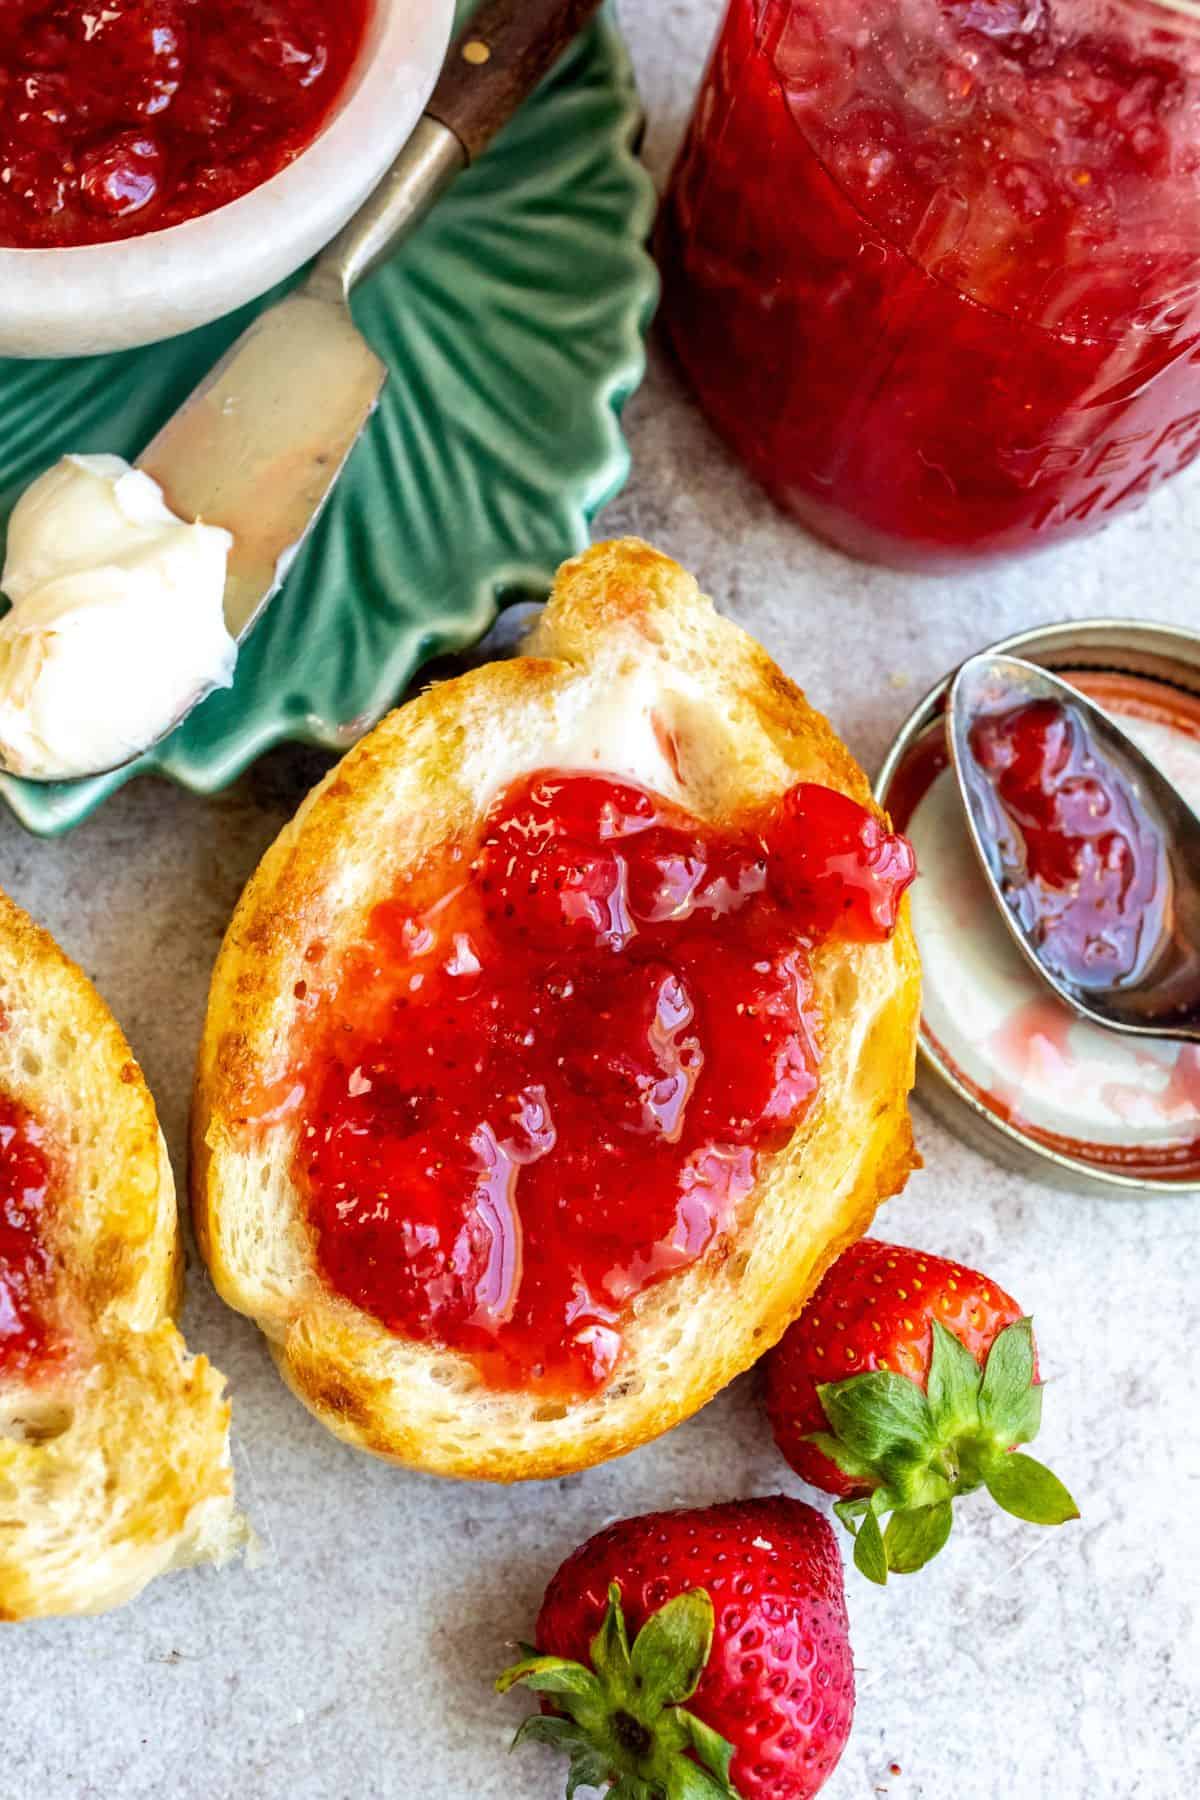 An overhead image of strawberry jam spread on toast, with a jar filled with jam on the side.